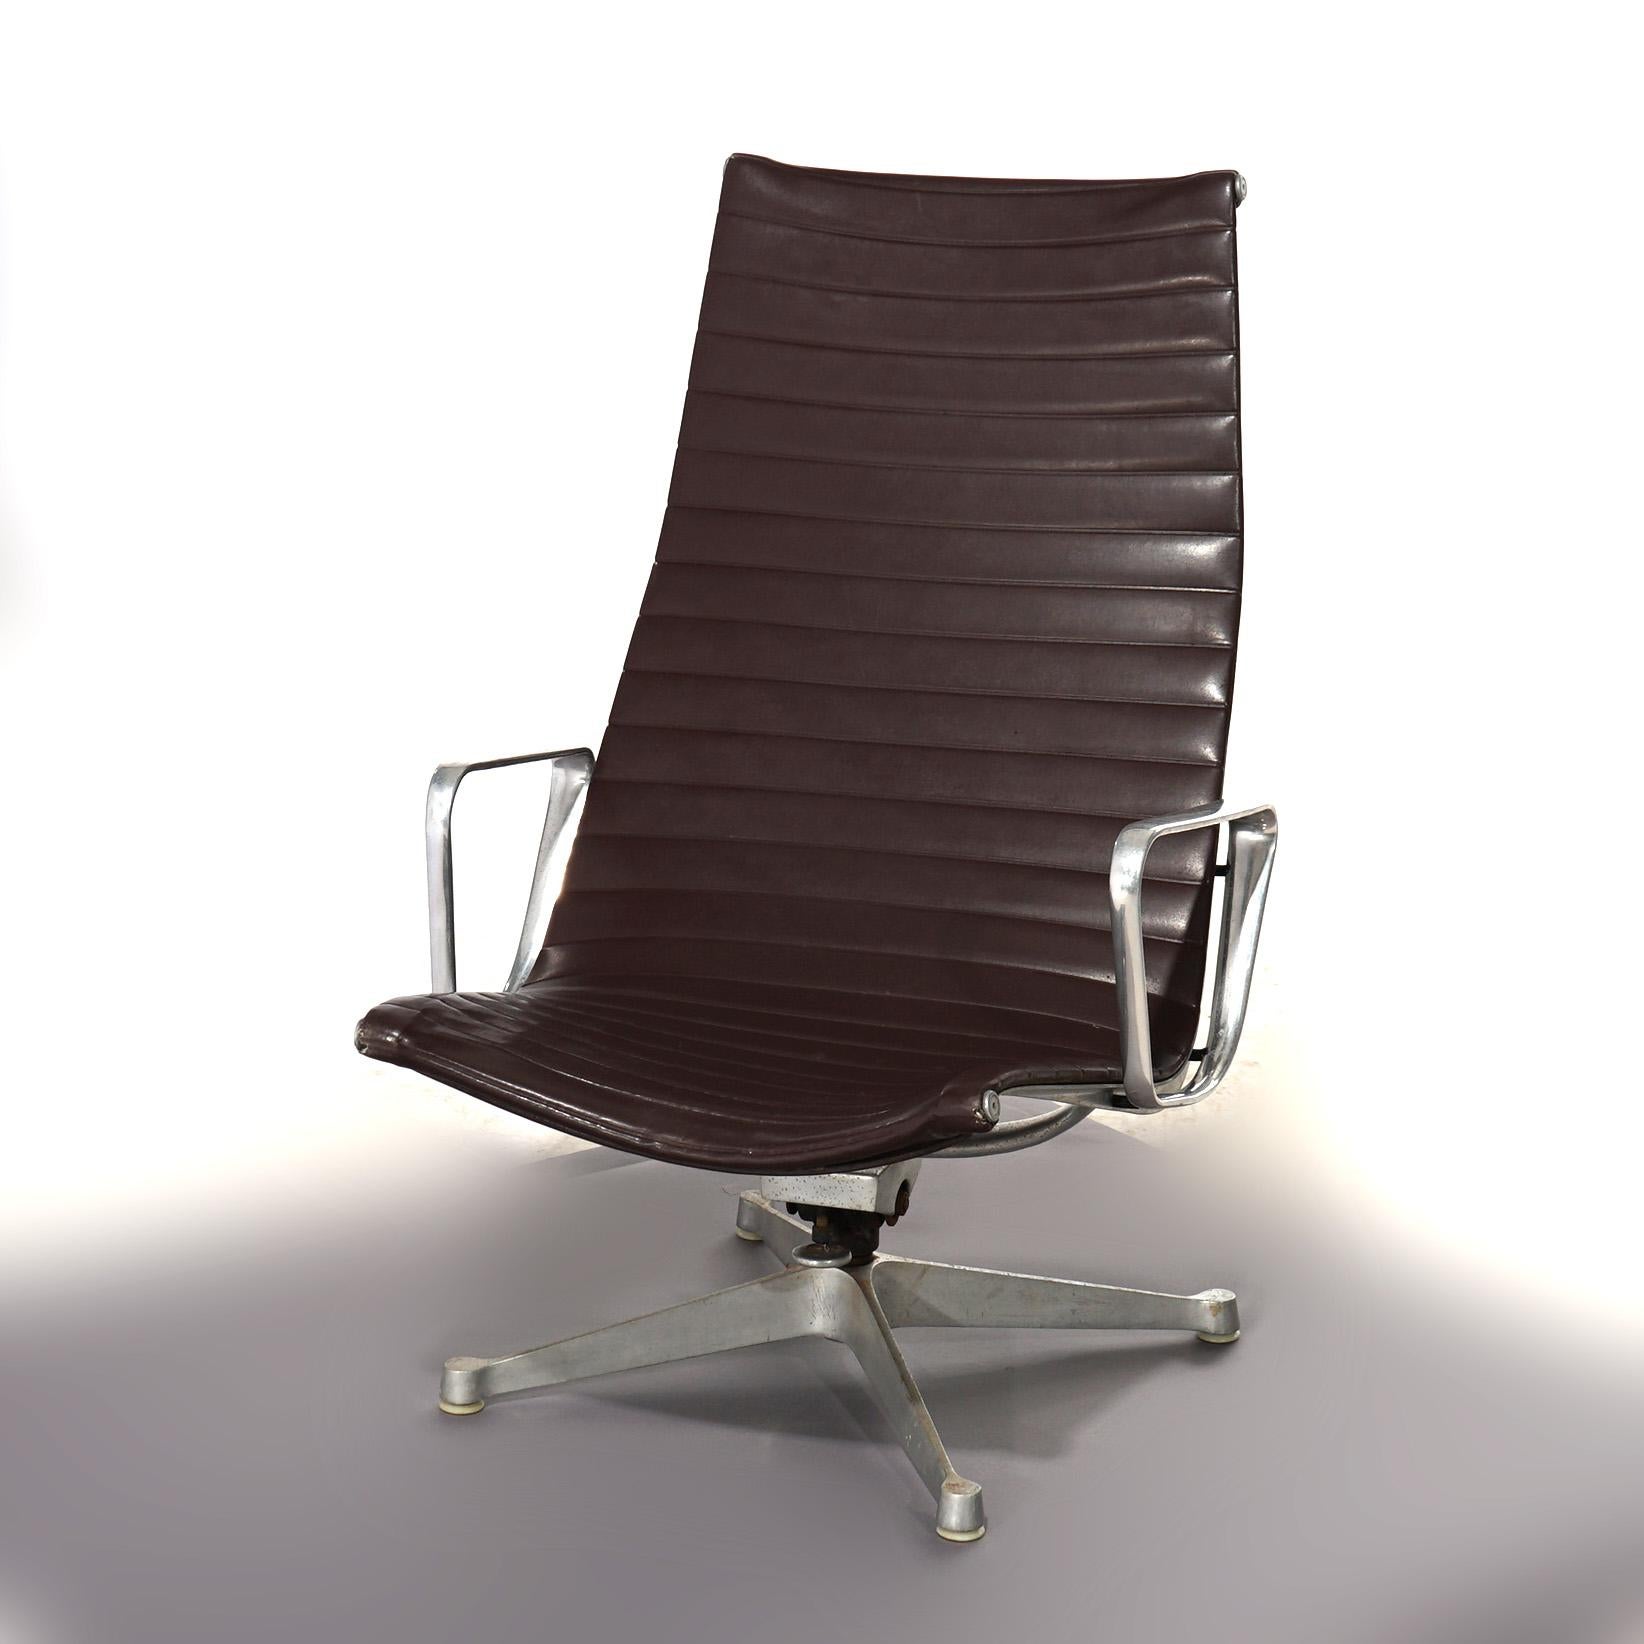 A Mid Century Modern Eames by Miller (attr.) desk chair offers leather ribbed back and seat on chrome swivel frame, unmarked by maker, C1950

Measures- 39''H x 25.5''W x 29.25''D; 13'' SH